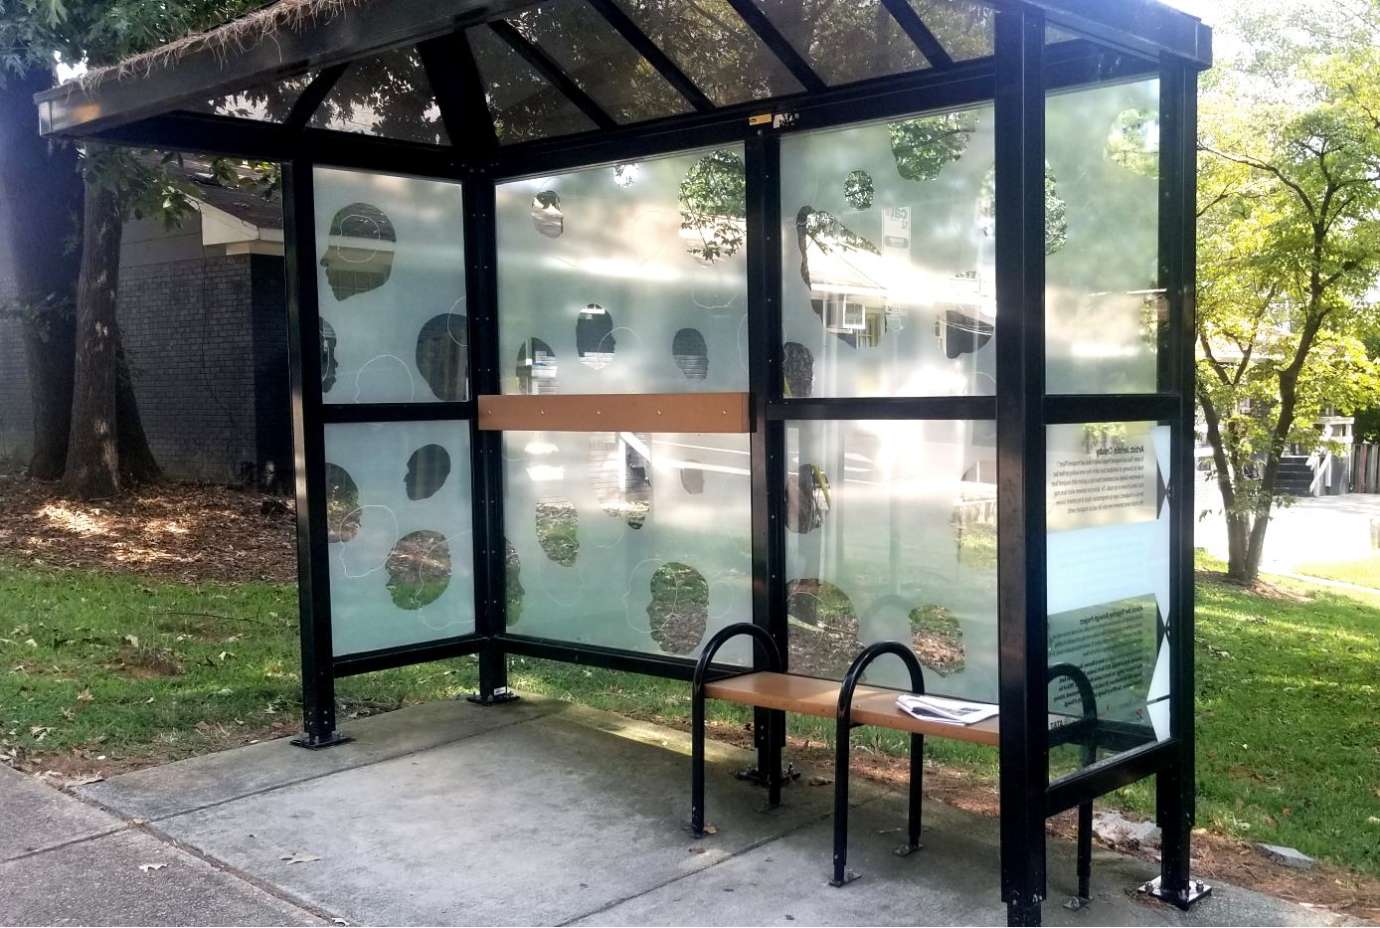 artwork by Jerstin Crosby covering the windows of a bus shelter